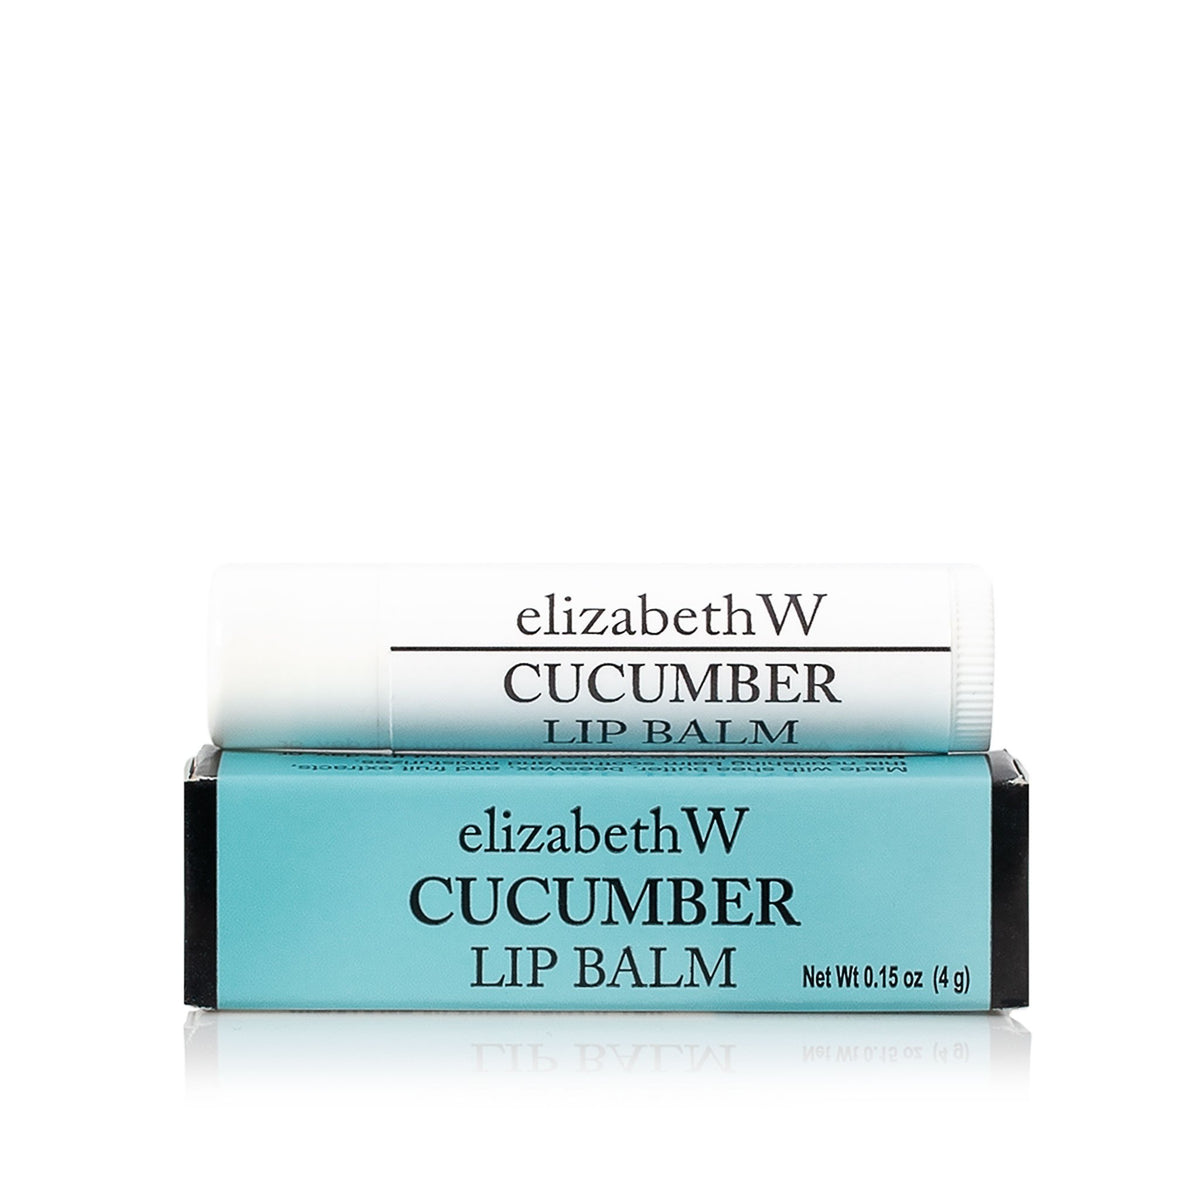 A tube of elizabeth W Botanical Apothecary Cucumber Lip Balm placed on top of its teal and black packaging, set against a white background.